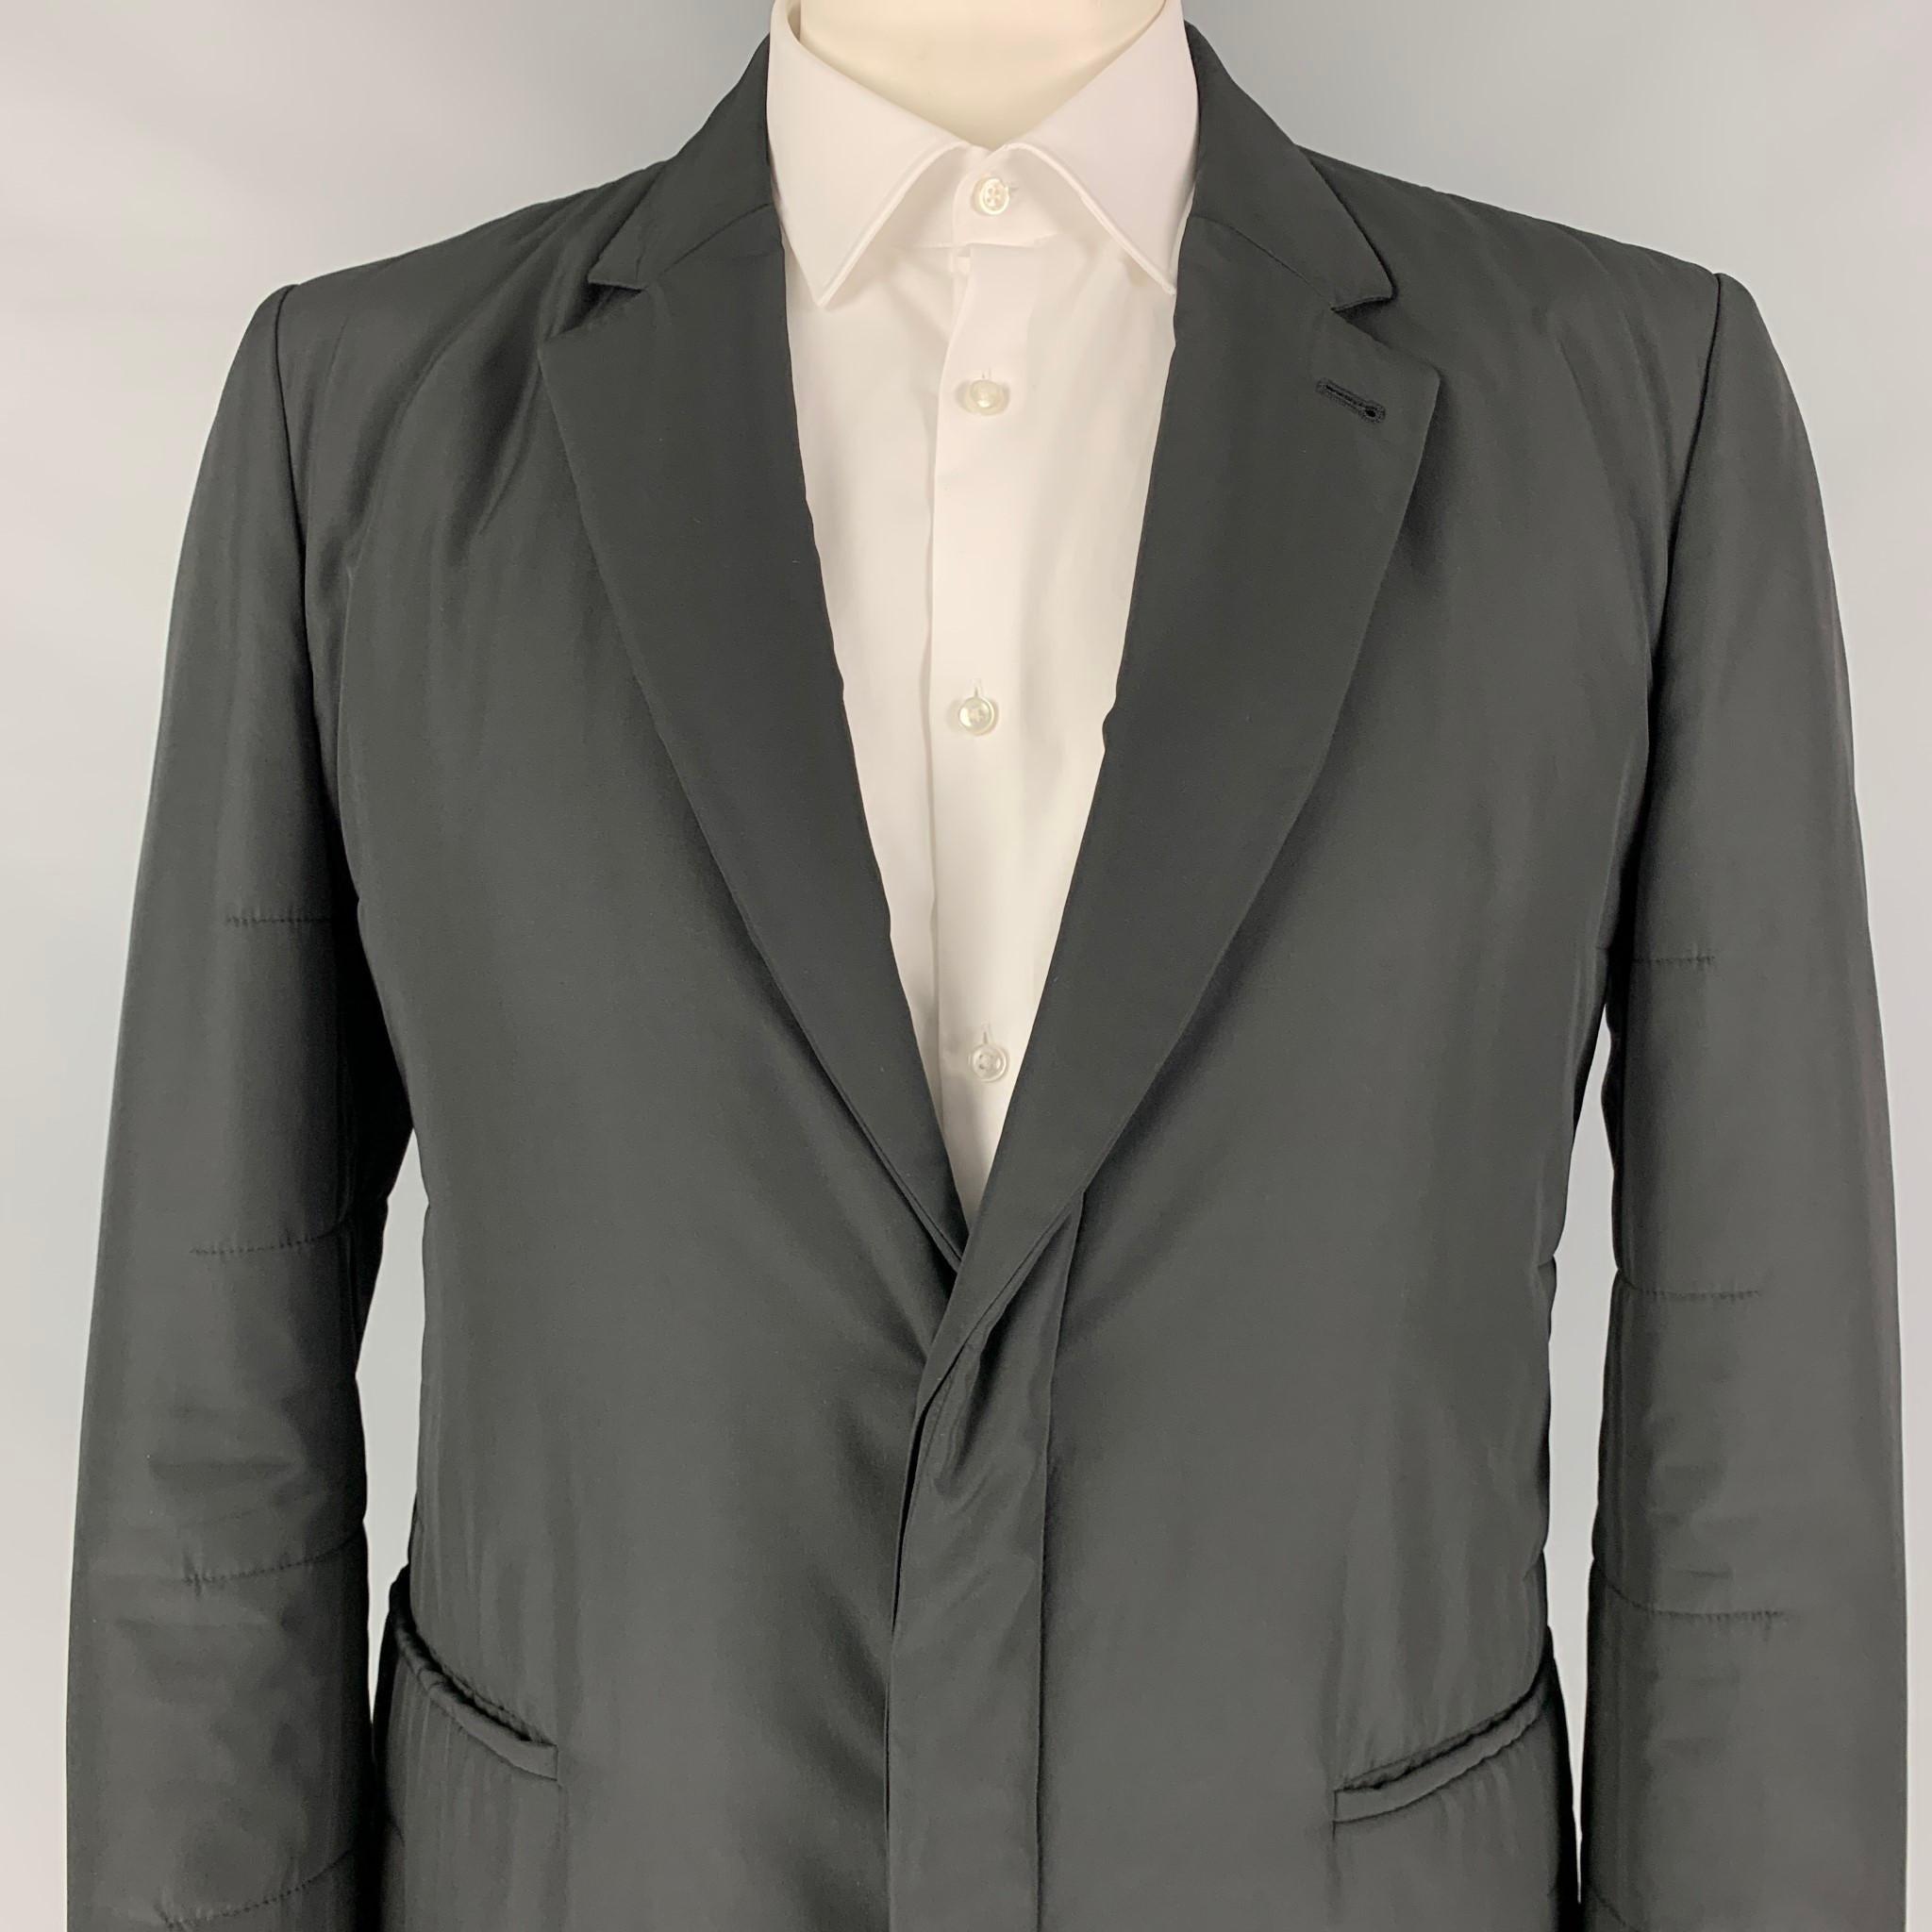 CALVIN KLEIN COLLECTION sport coat comes in a black quilted polyester with a full liner featuring a notch lapel, slit pockets, and a hidden double button closure. 

Excellent Pre-Owned Condition.
Marked: 54

Measurements:

Shoulder: 18.5 in.
Chest: